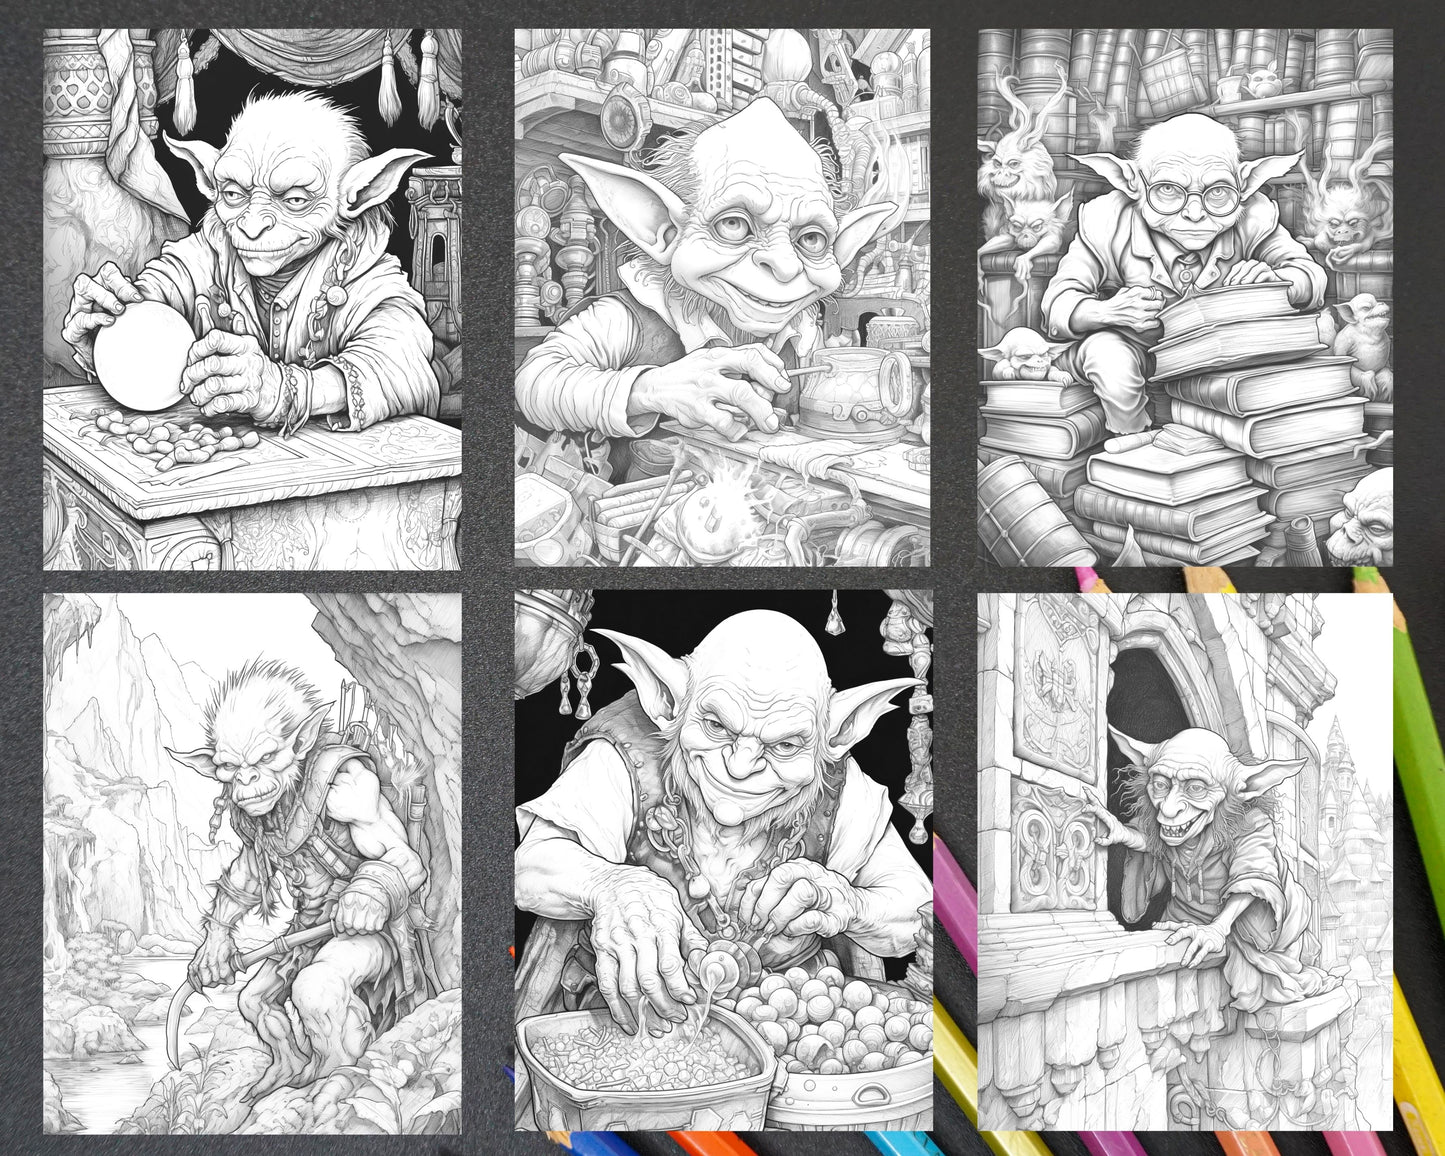 fantasy goblins grayscale coloring pages, grayscale coloring pages printable for adults, detailed artwork, unique fantasy art, printable coloring pages, stress relief coloring, therapeutic art, digital download, grayscale technique, intricate designs, adult coloring, printable goblin art, black and white coloring, fantasy art, coloring book for adults